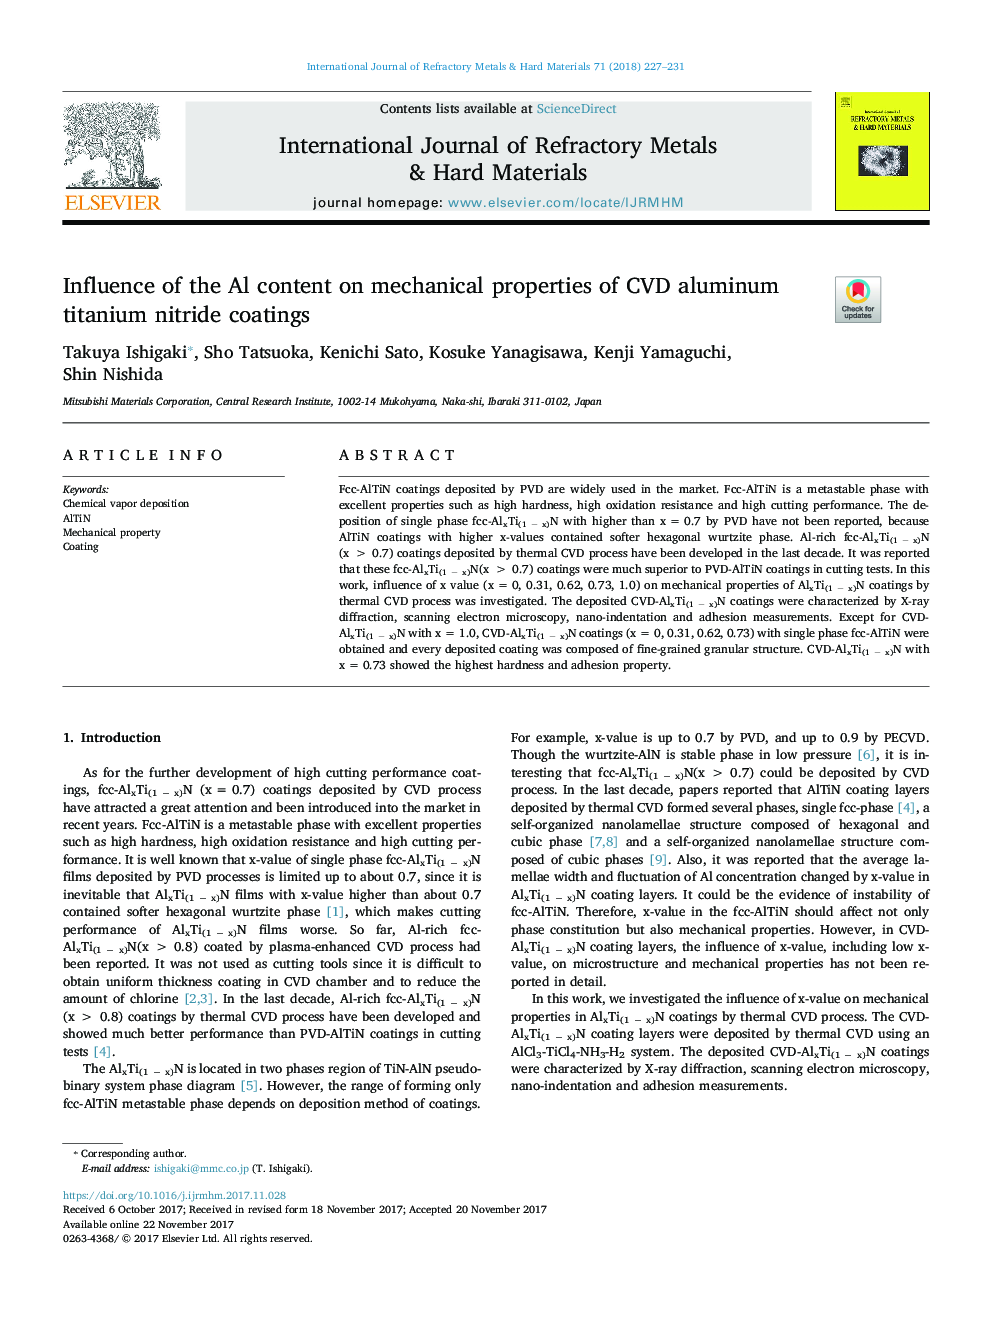 Influence of the Al content on mechanical properties of CVD aluminum titanium nitride coatings